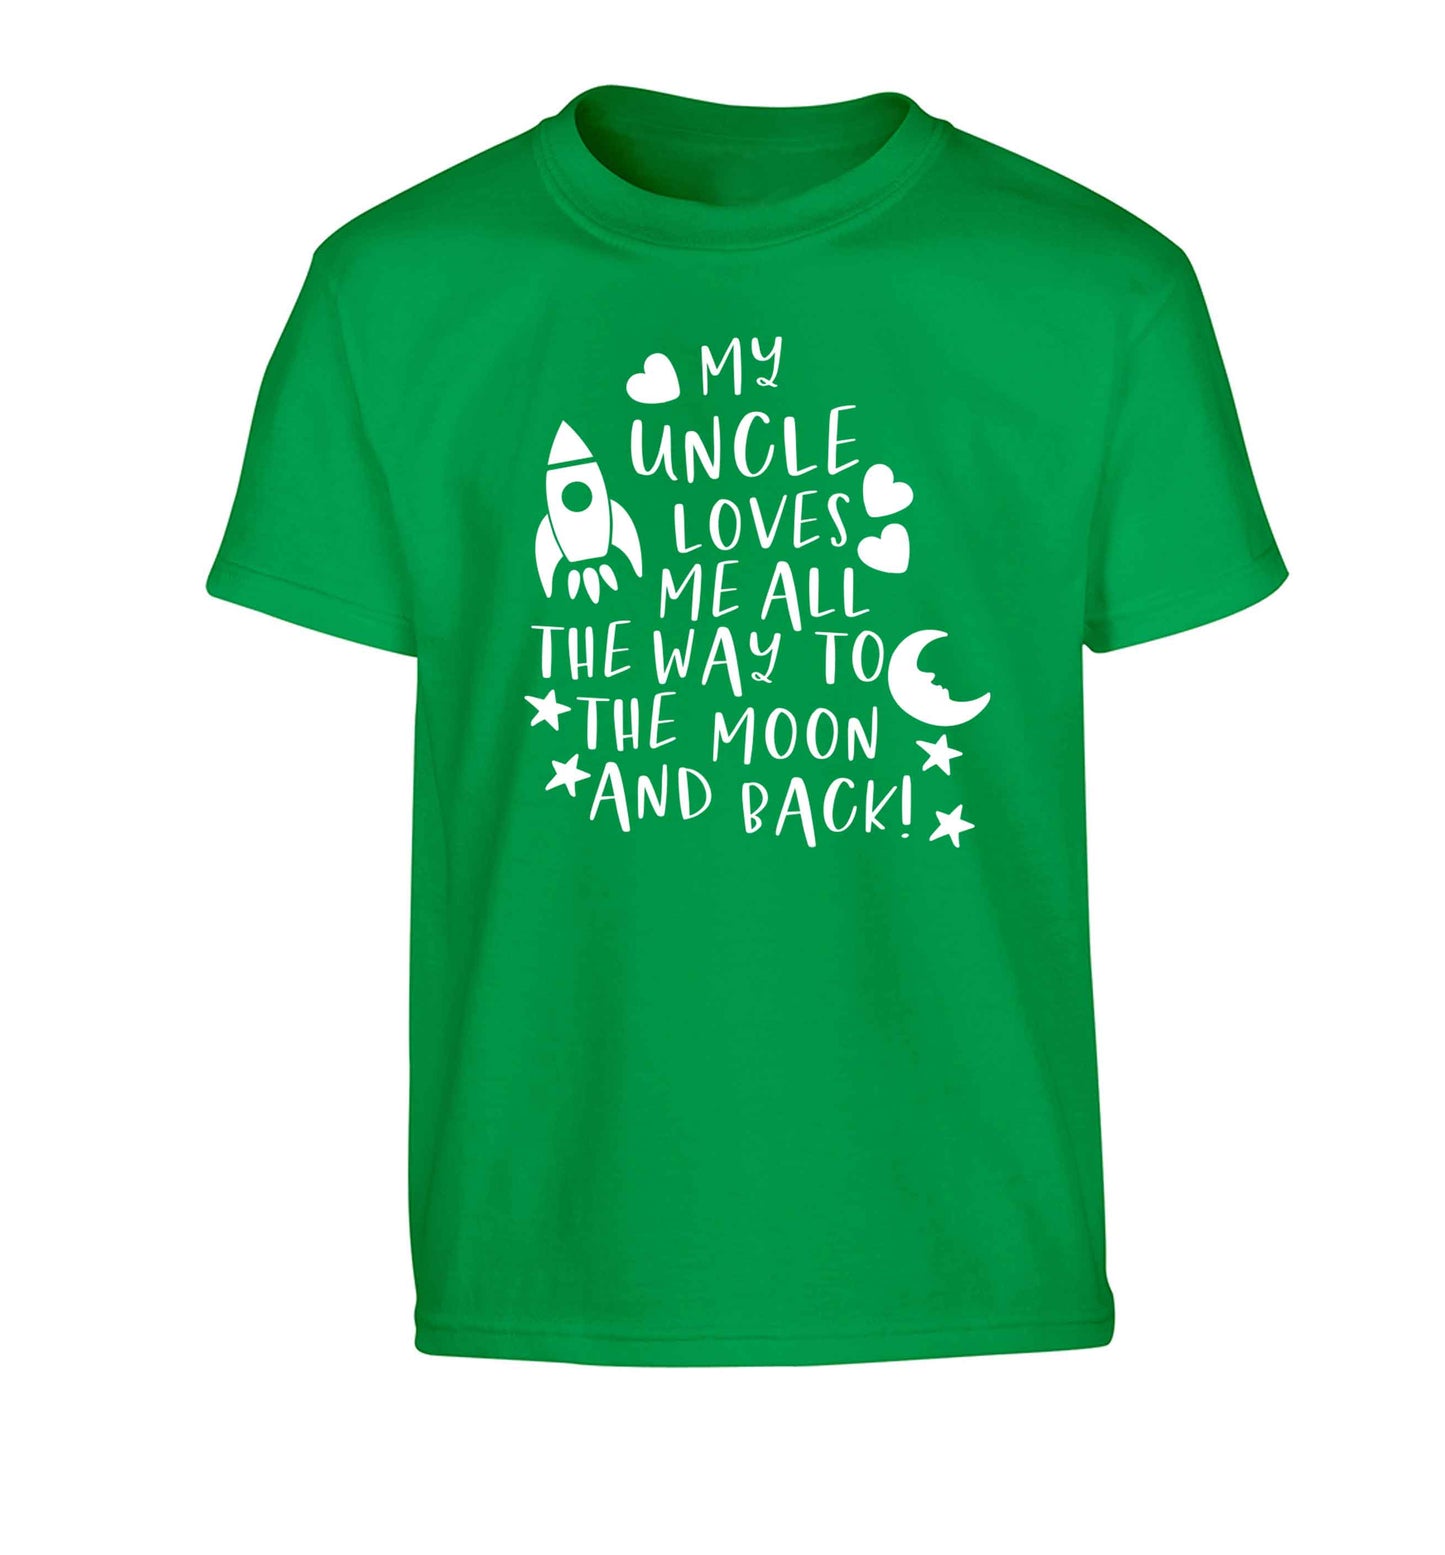 My uncle loves me all the way to the moon and back Children's green Tshirt 12-13 Years